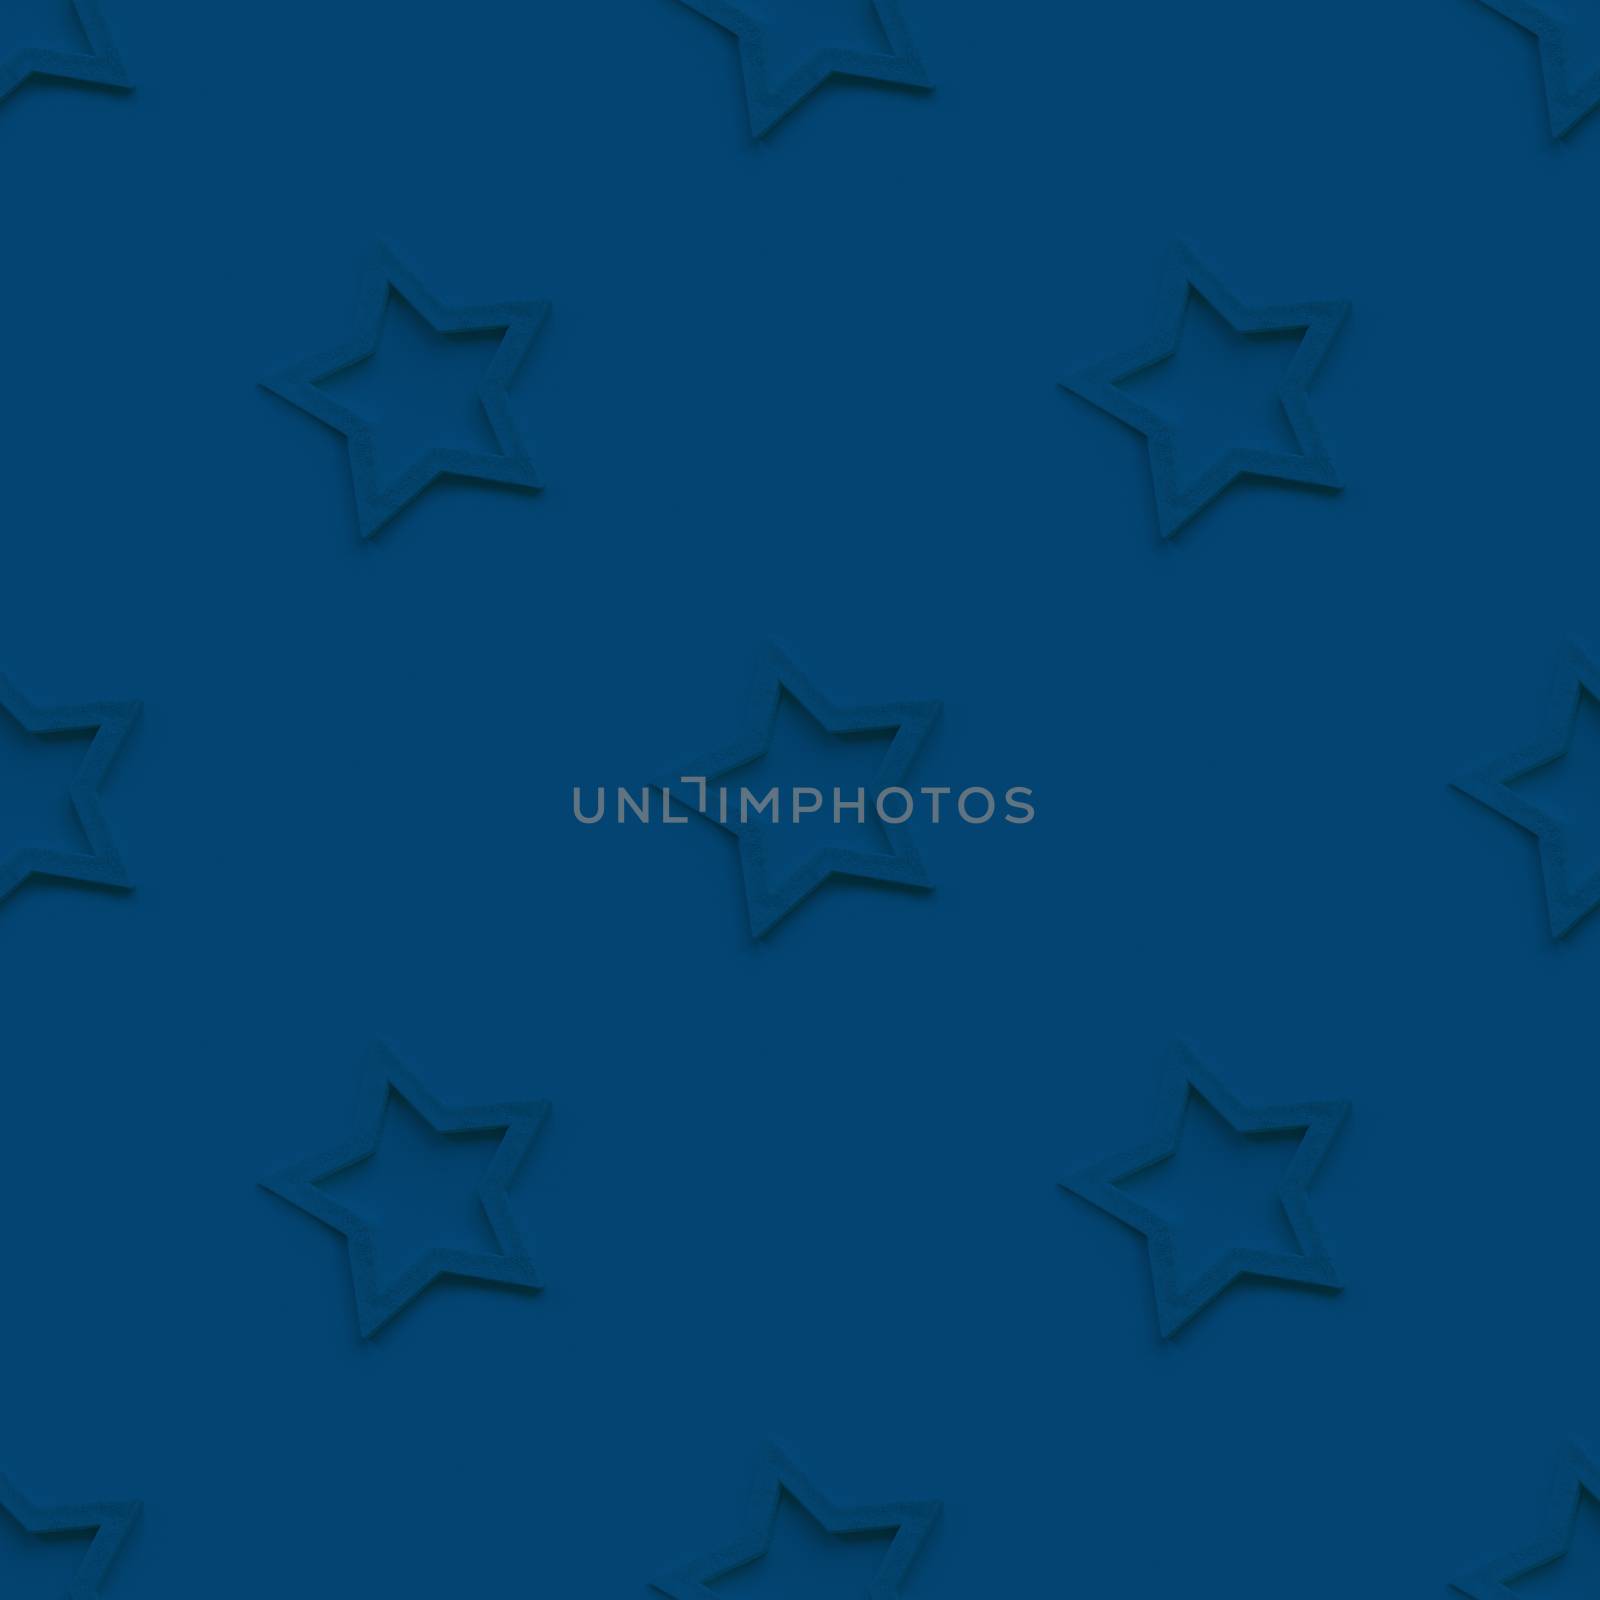 Seamless photo pattern with decorative stars. Christmas decorations on classic blue background. by aksenovko